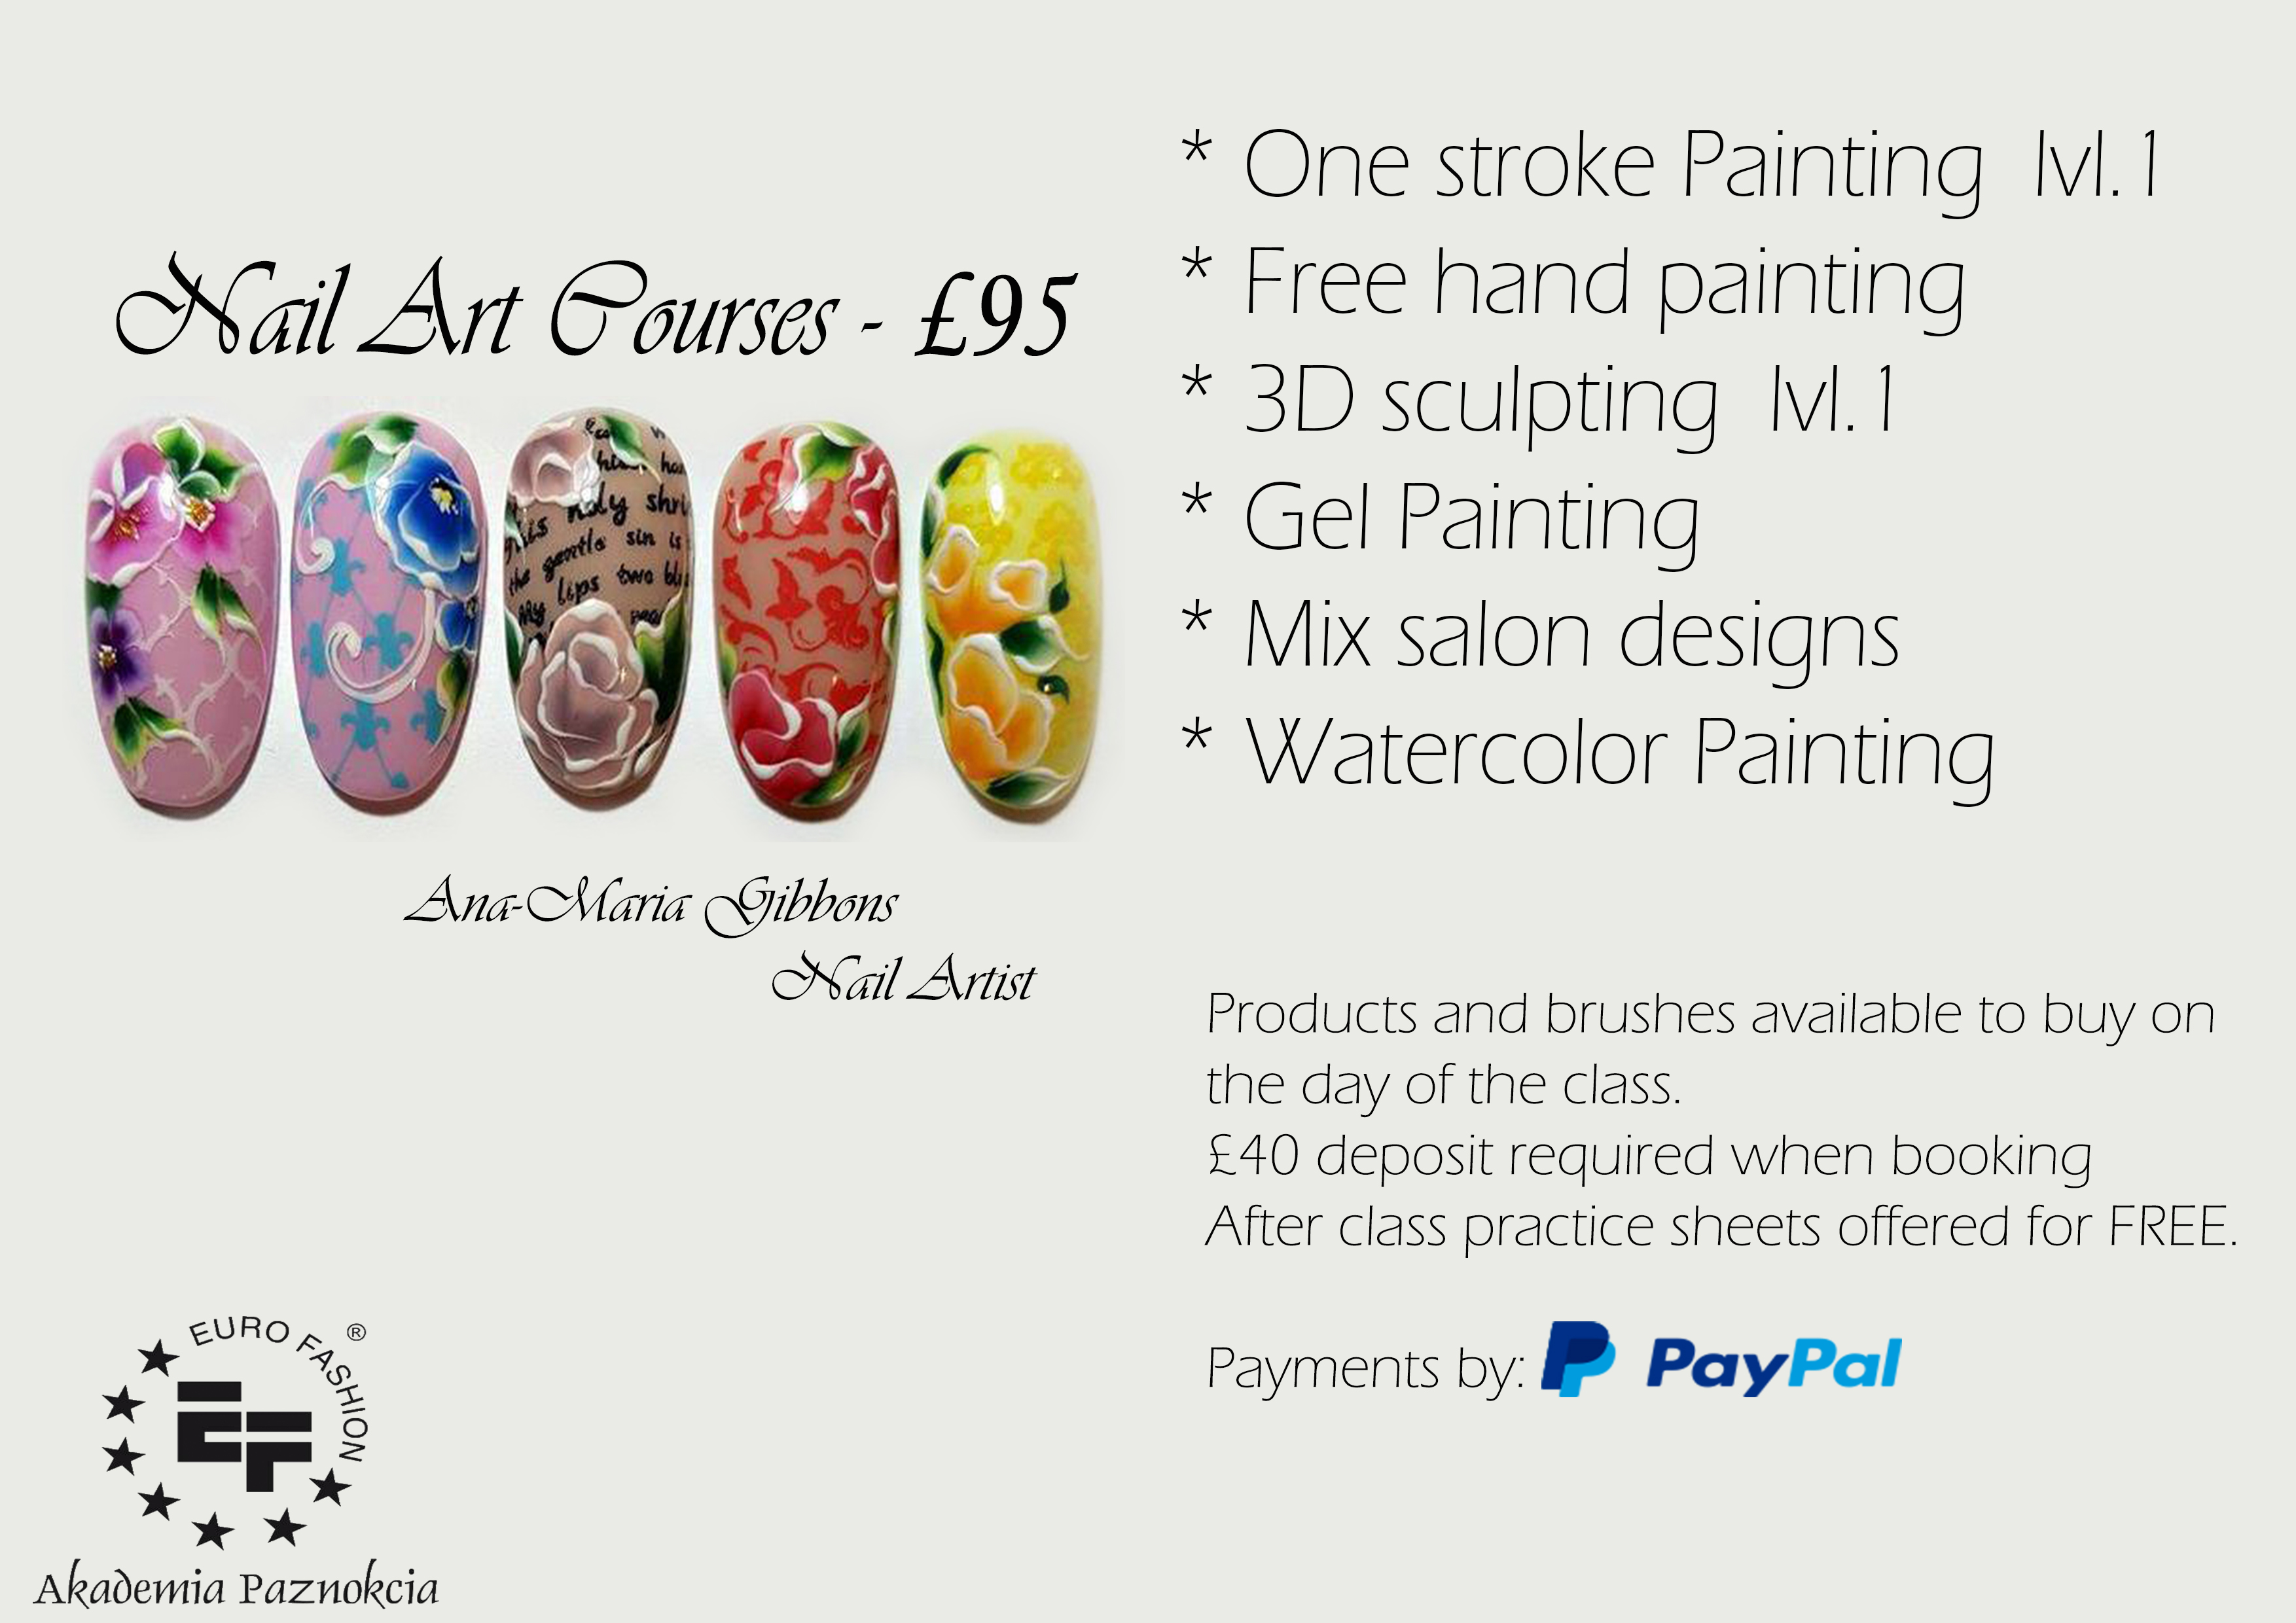 10. "Professional Nail Art Design Courses and Classes Videos" - wide 8